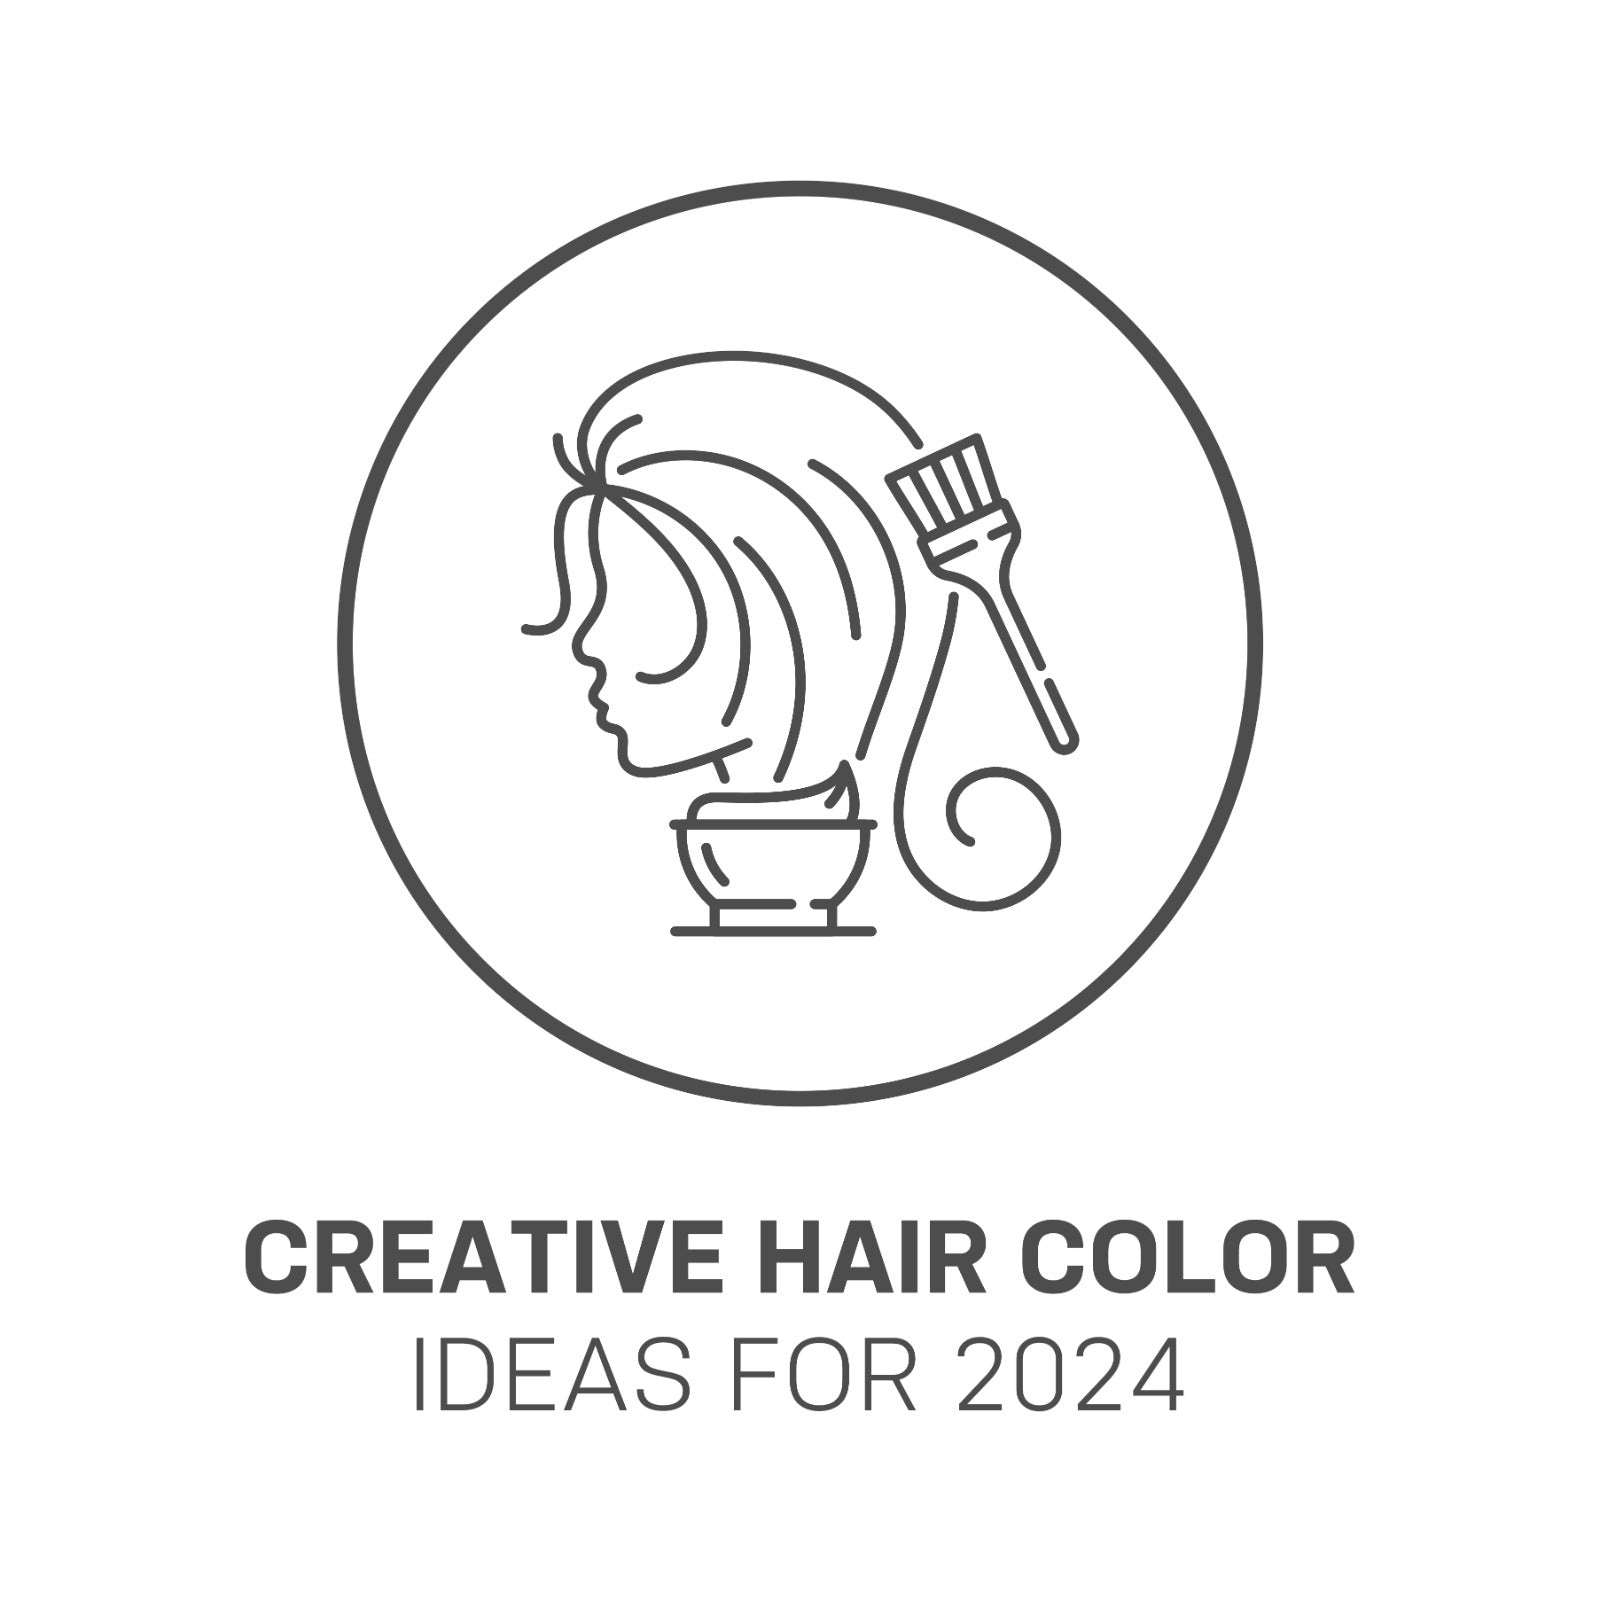 hair color ideas to try in 2024